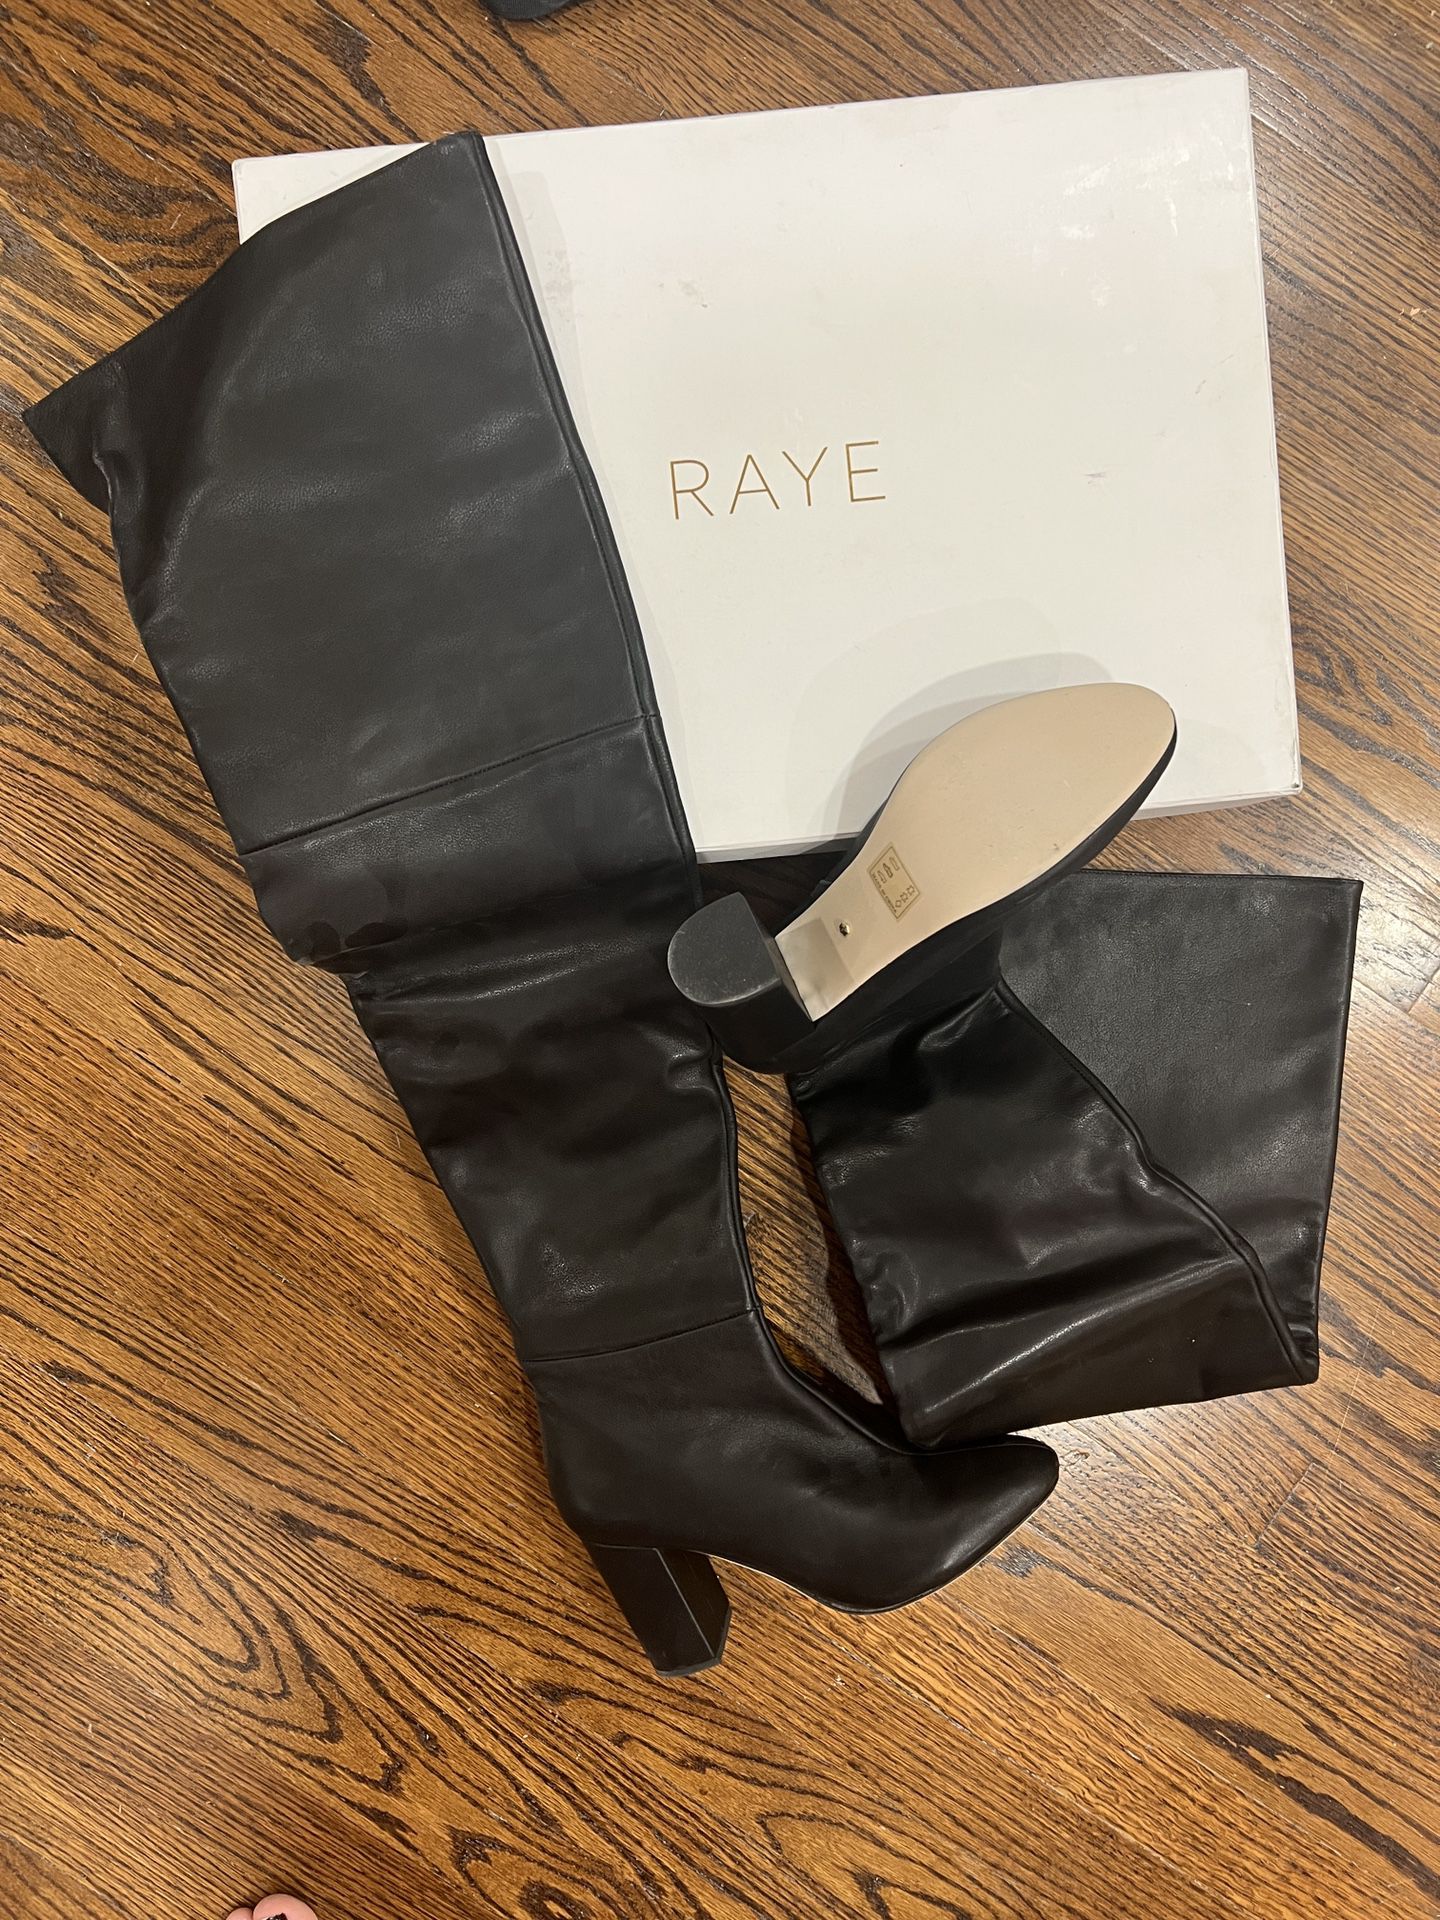 RAYE Thigh High Genuine Leather Boots- Size 9